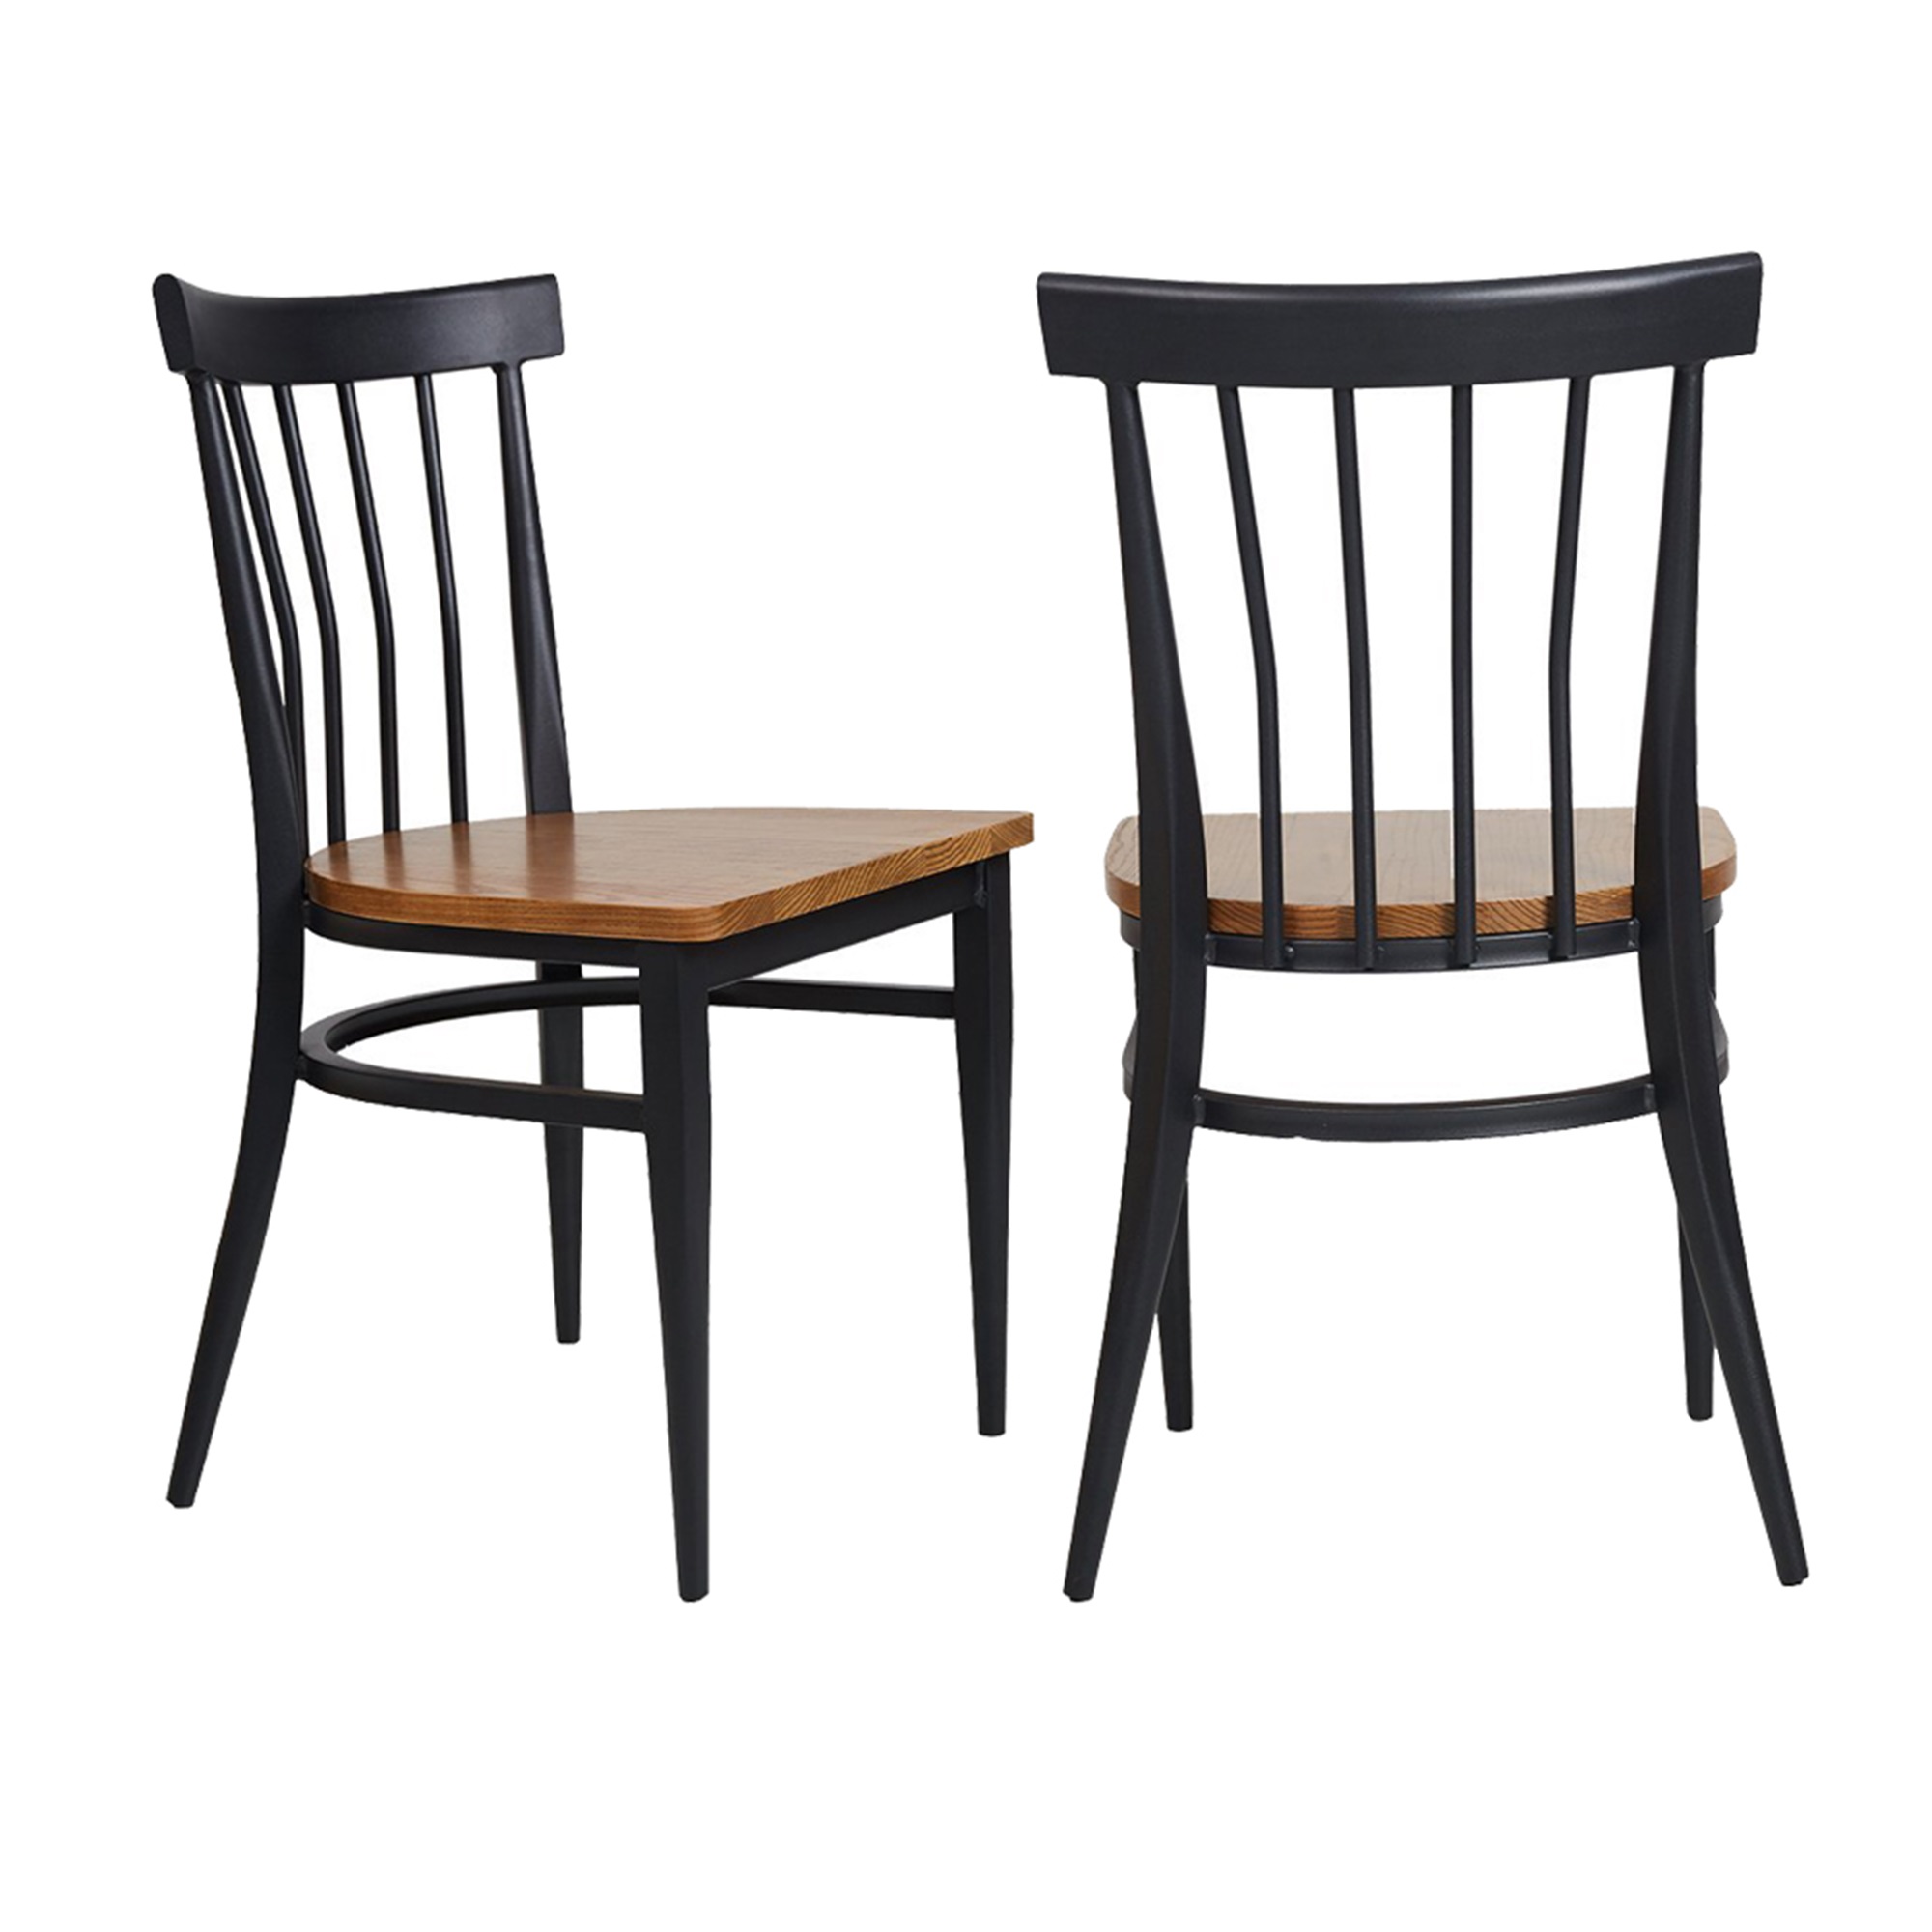 KARMAS PRODUCT Stackable Metal Dining Chairs w/ Wood Seat,Indoor